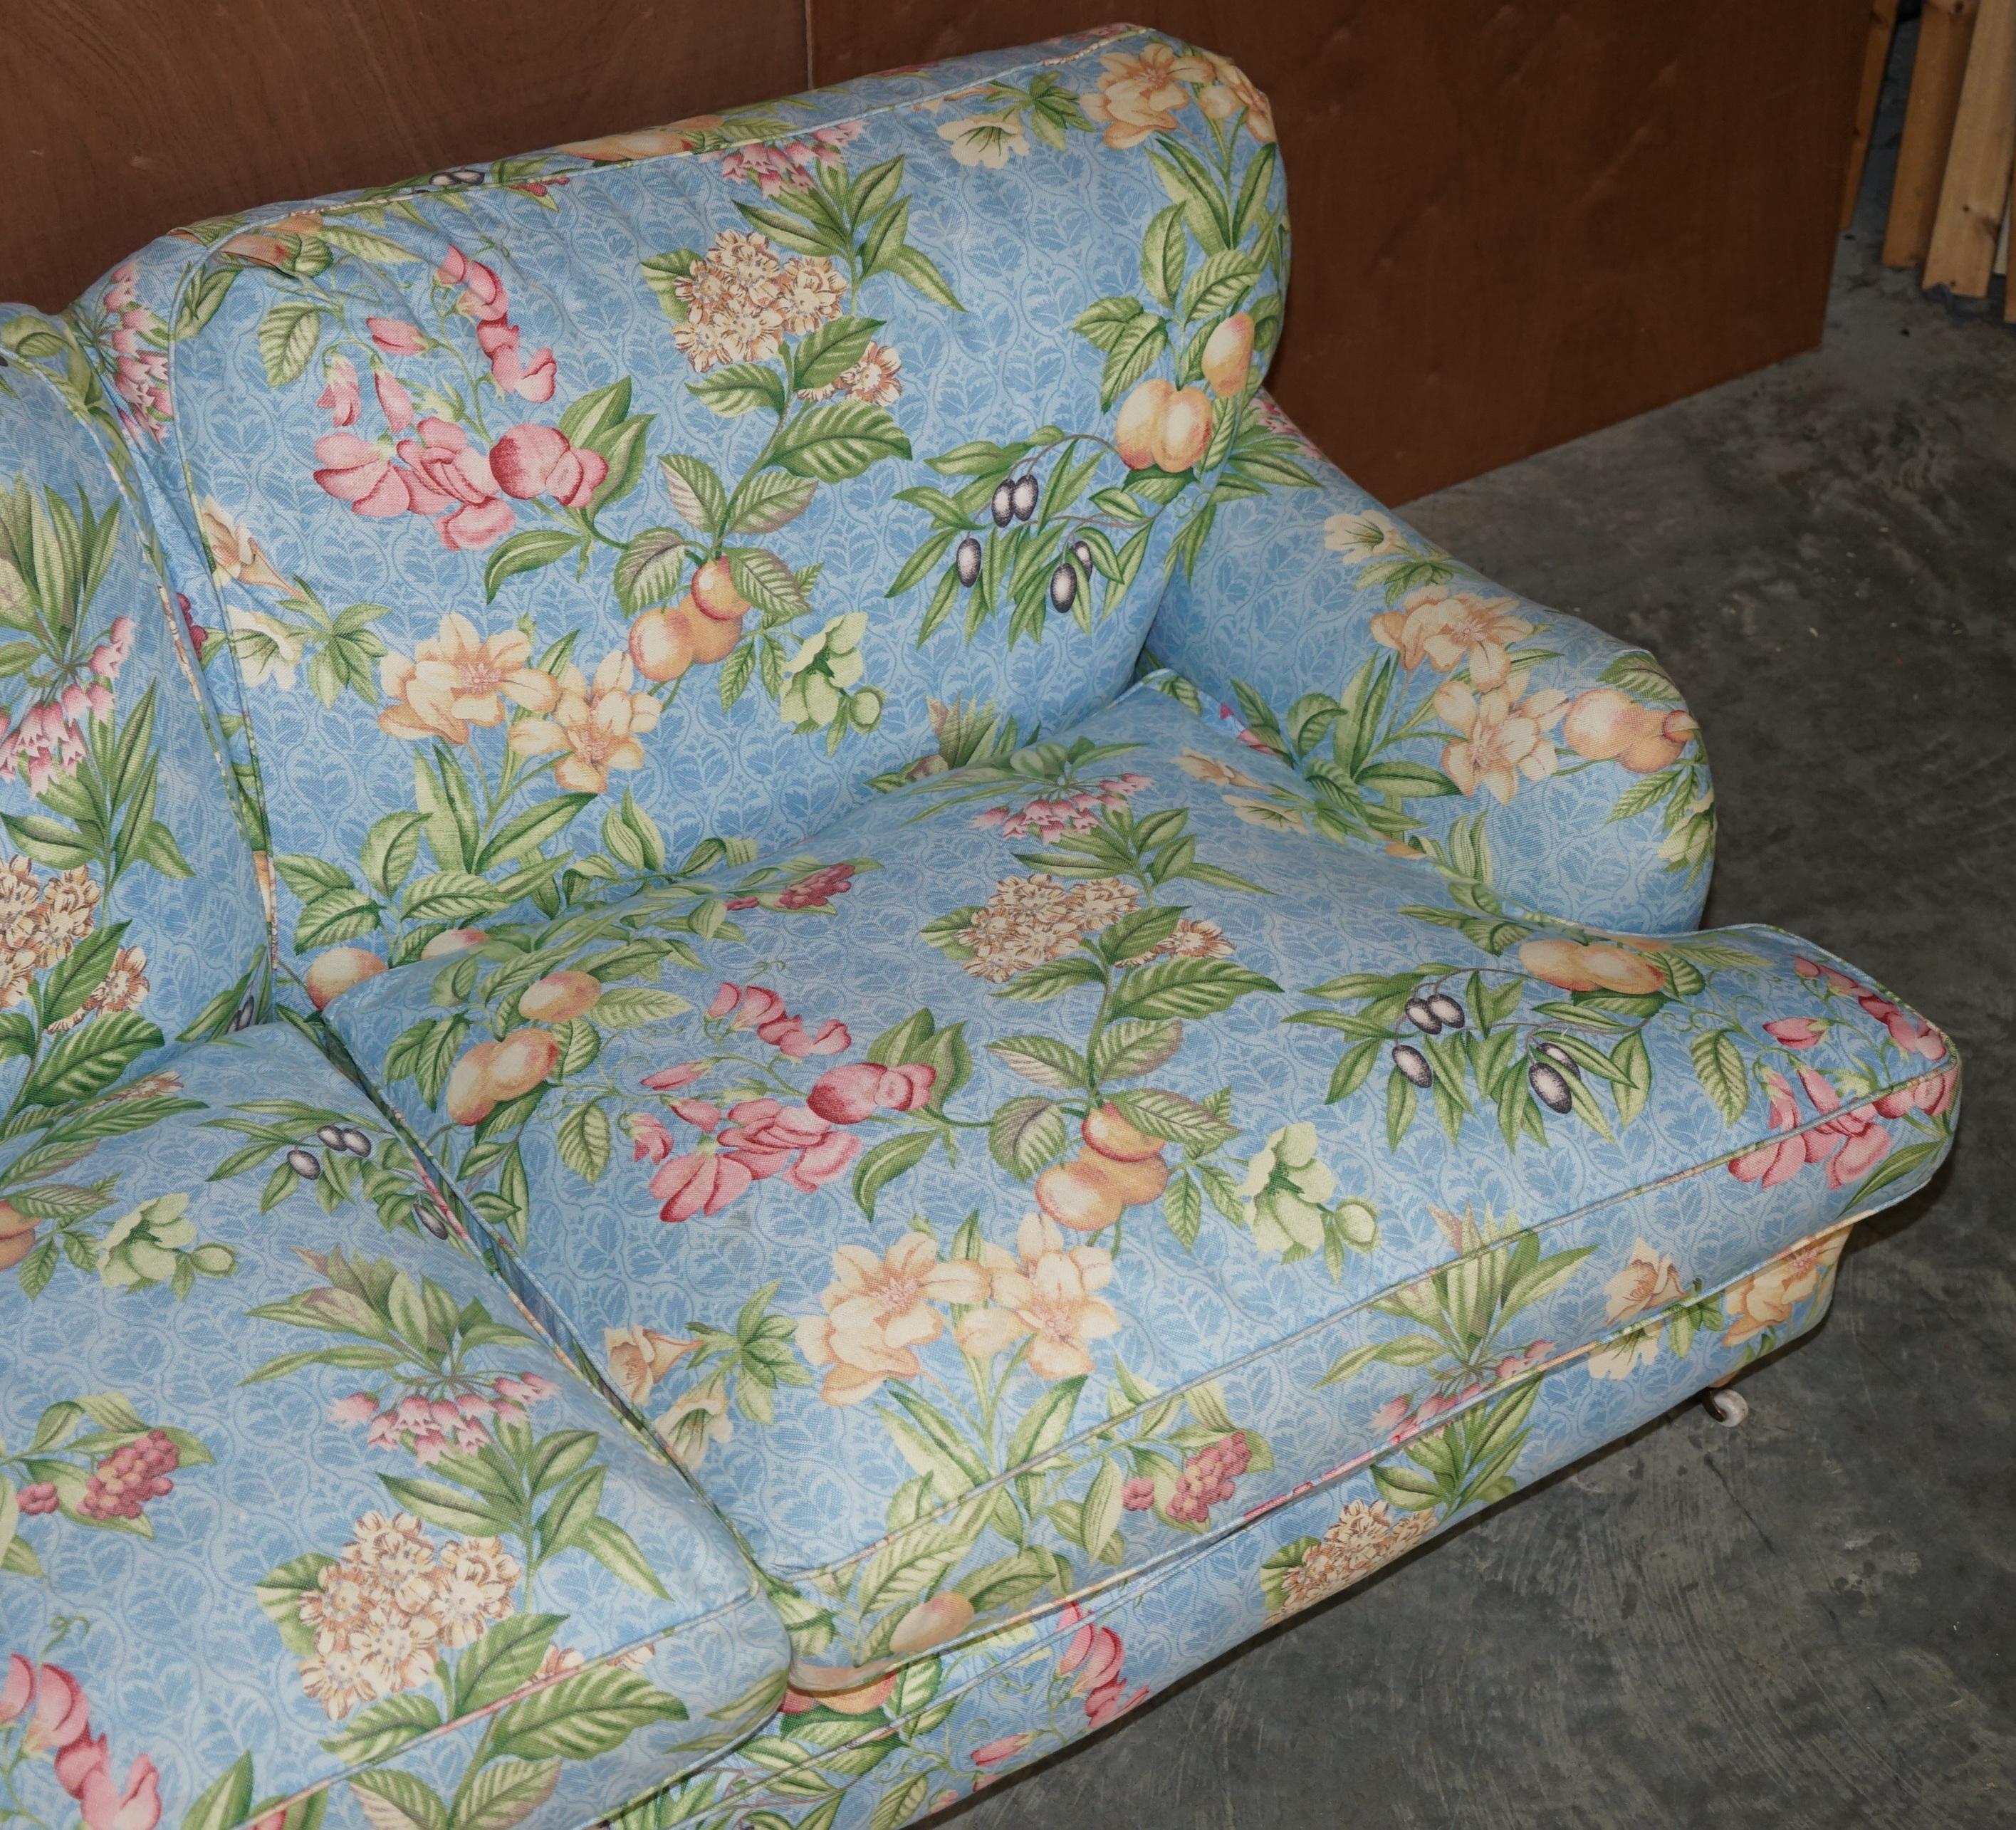 80s floral couch